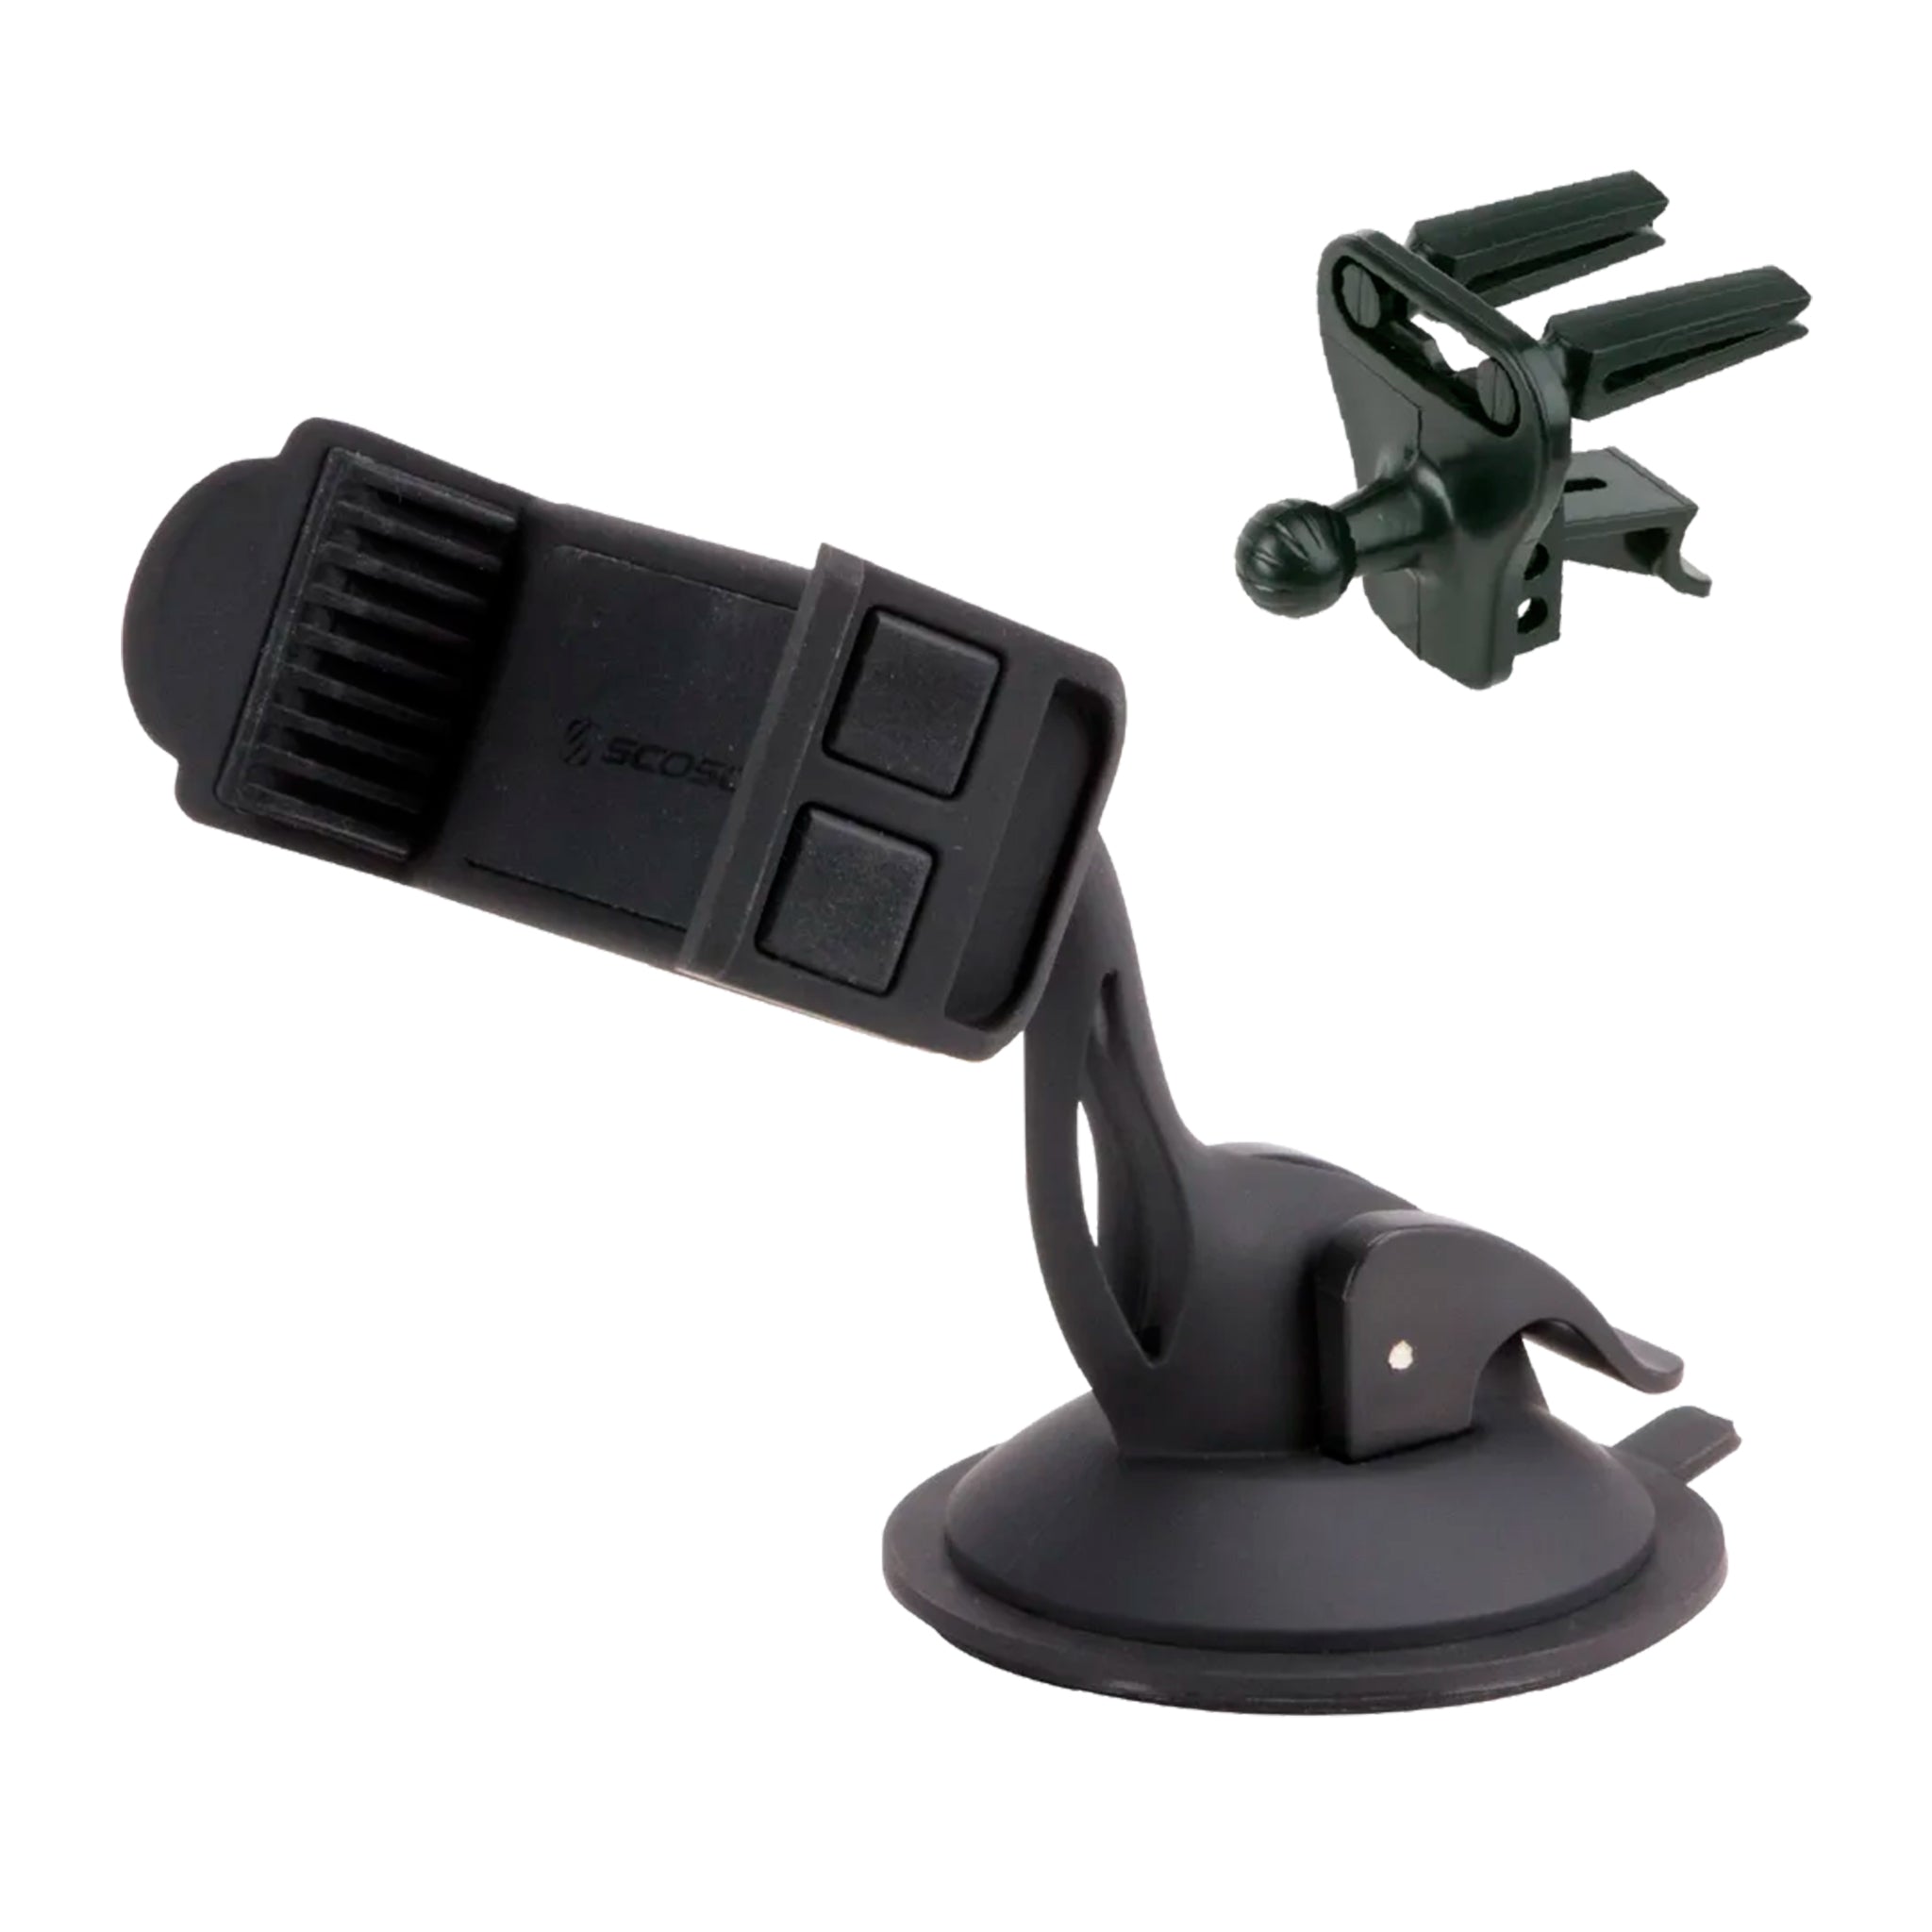 Scosche - 3 In 1 Universal Vent And Suction Cup Mount - Black